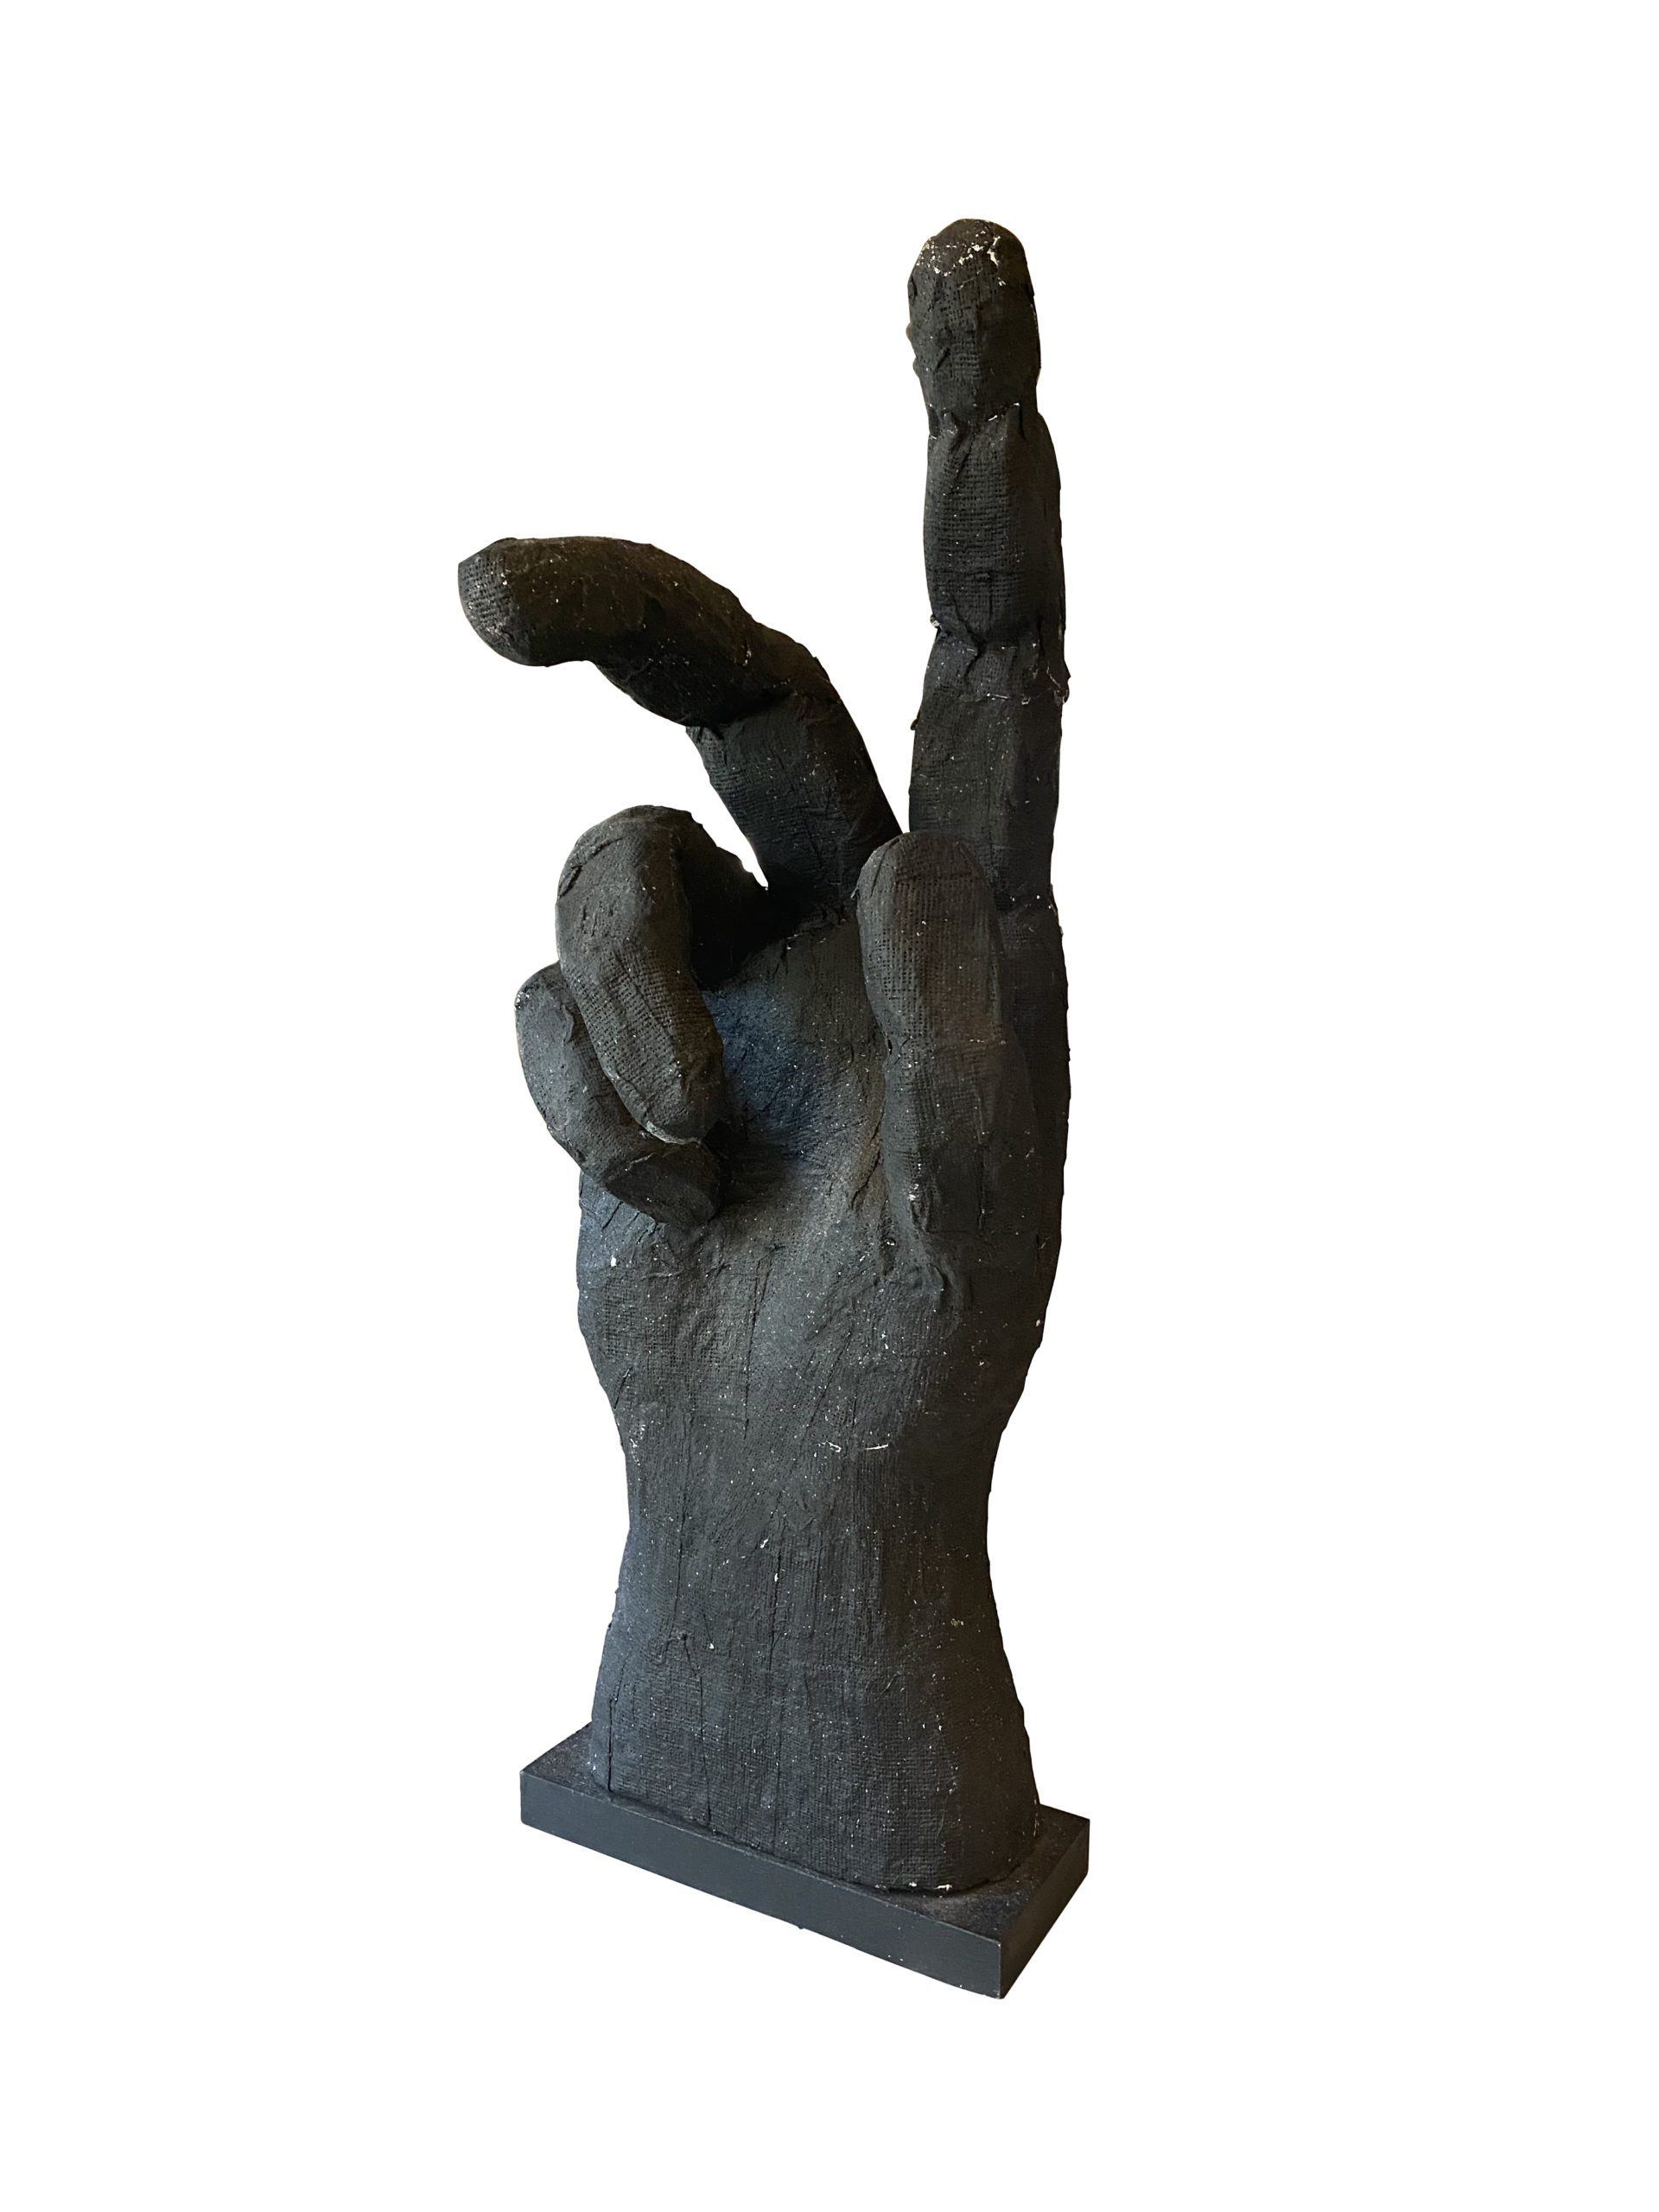 SOLD – Detroit Hand Sculpture – The Renner Project